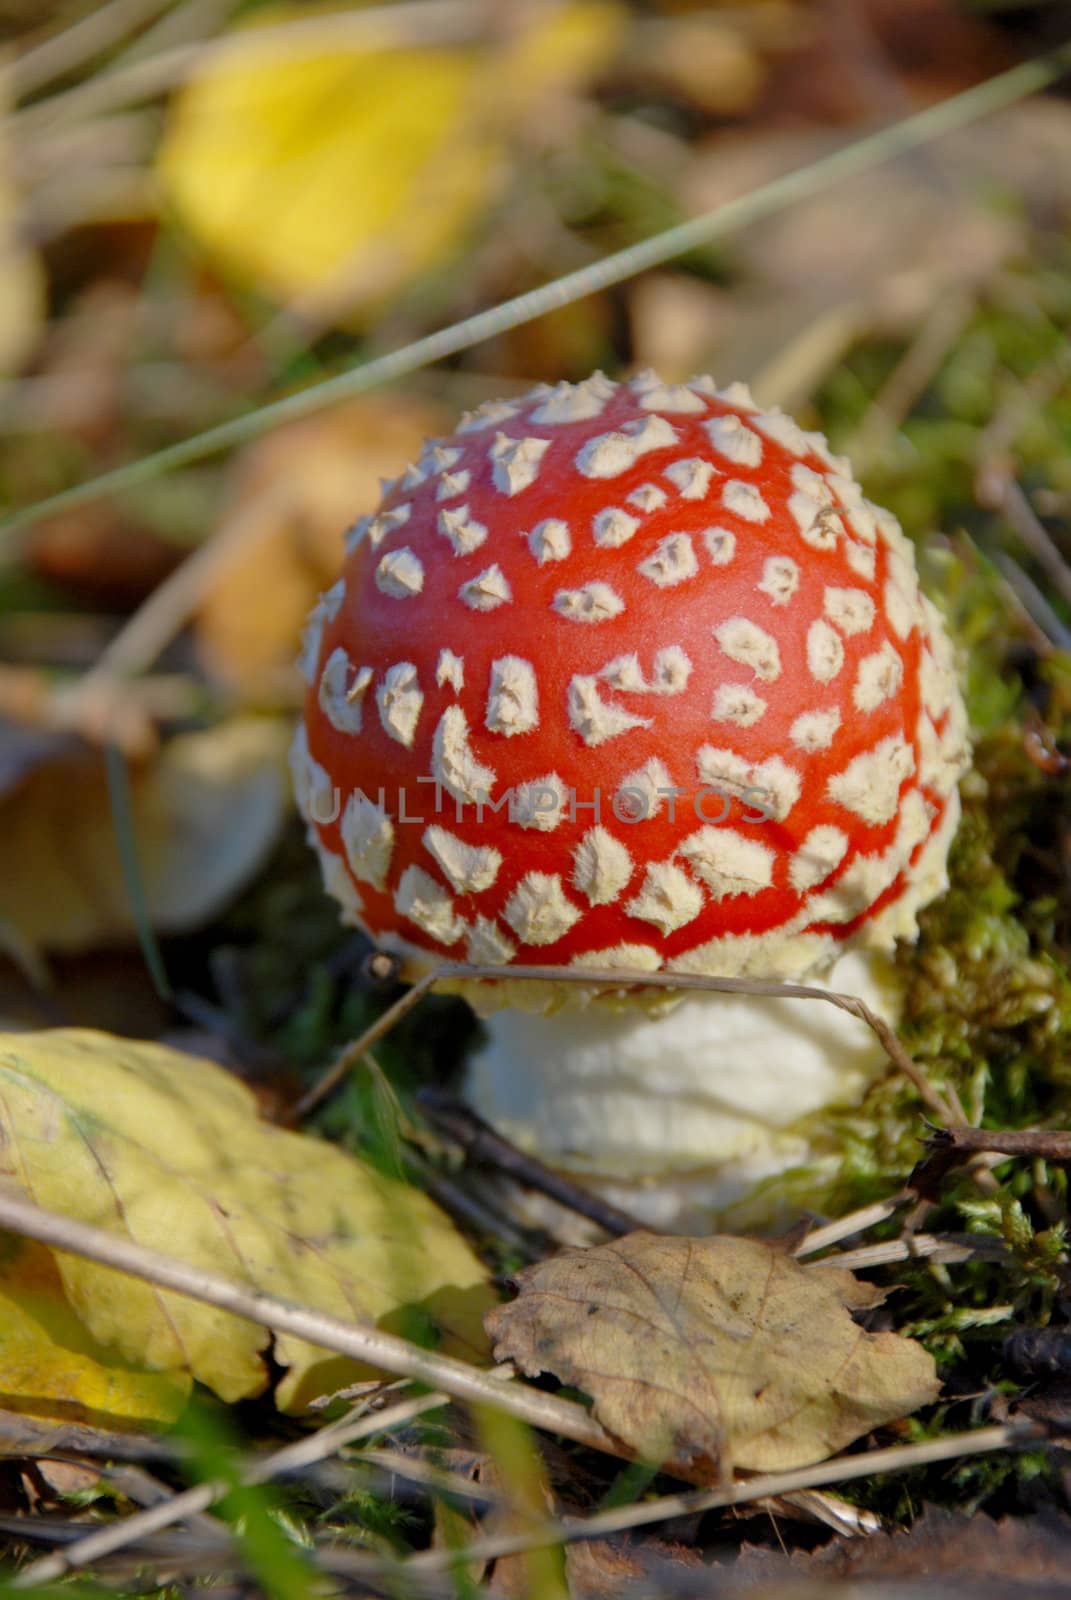 Red fly agaric by sauletas